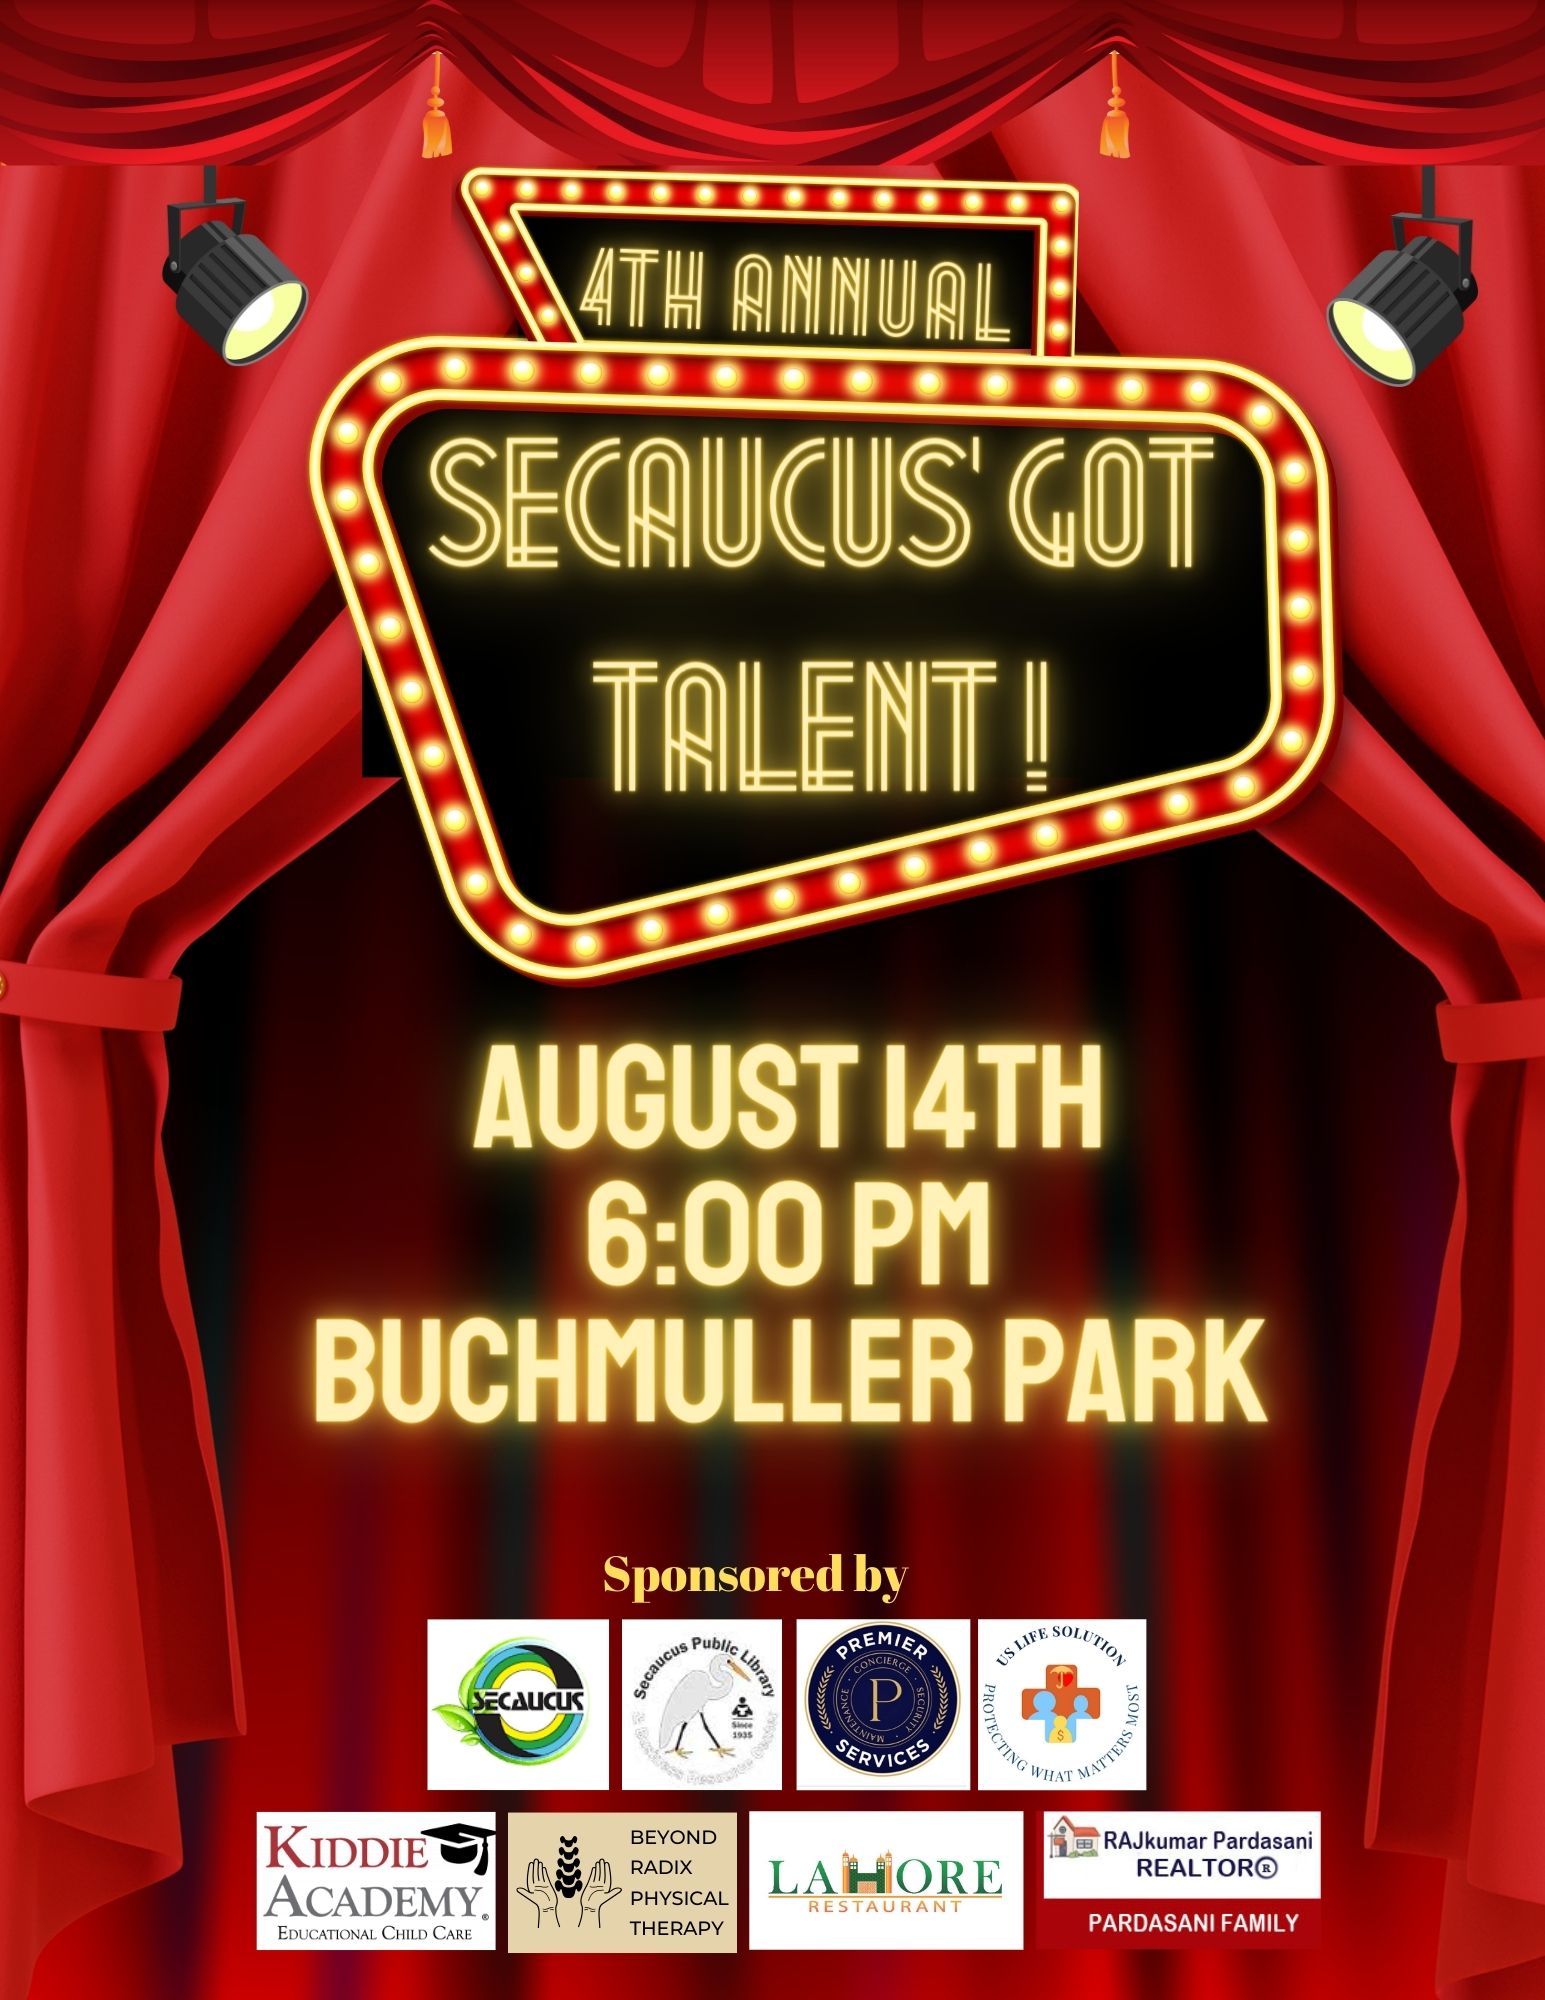 Flyer for Secaucus Got Talent. CLICK HERE for PDF version.